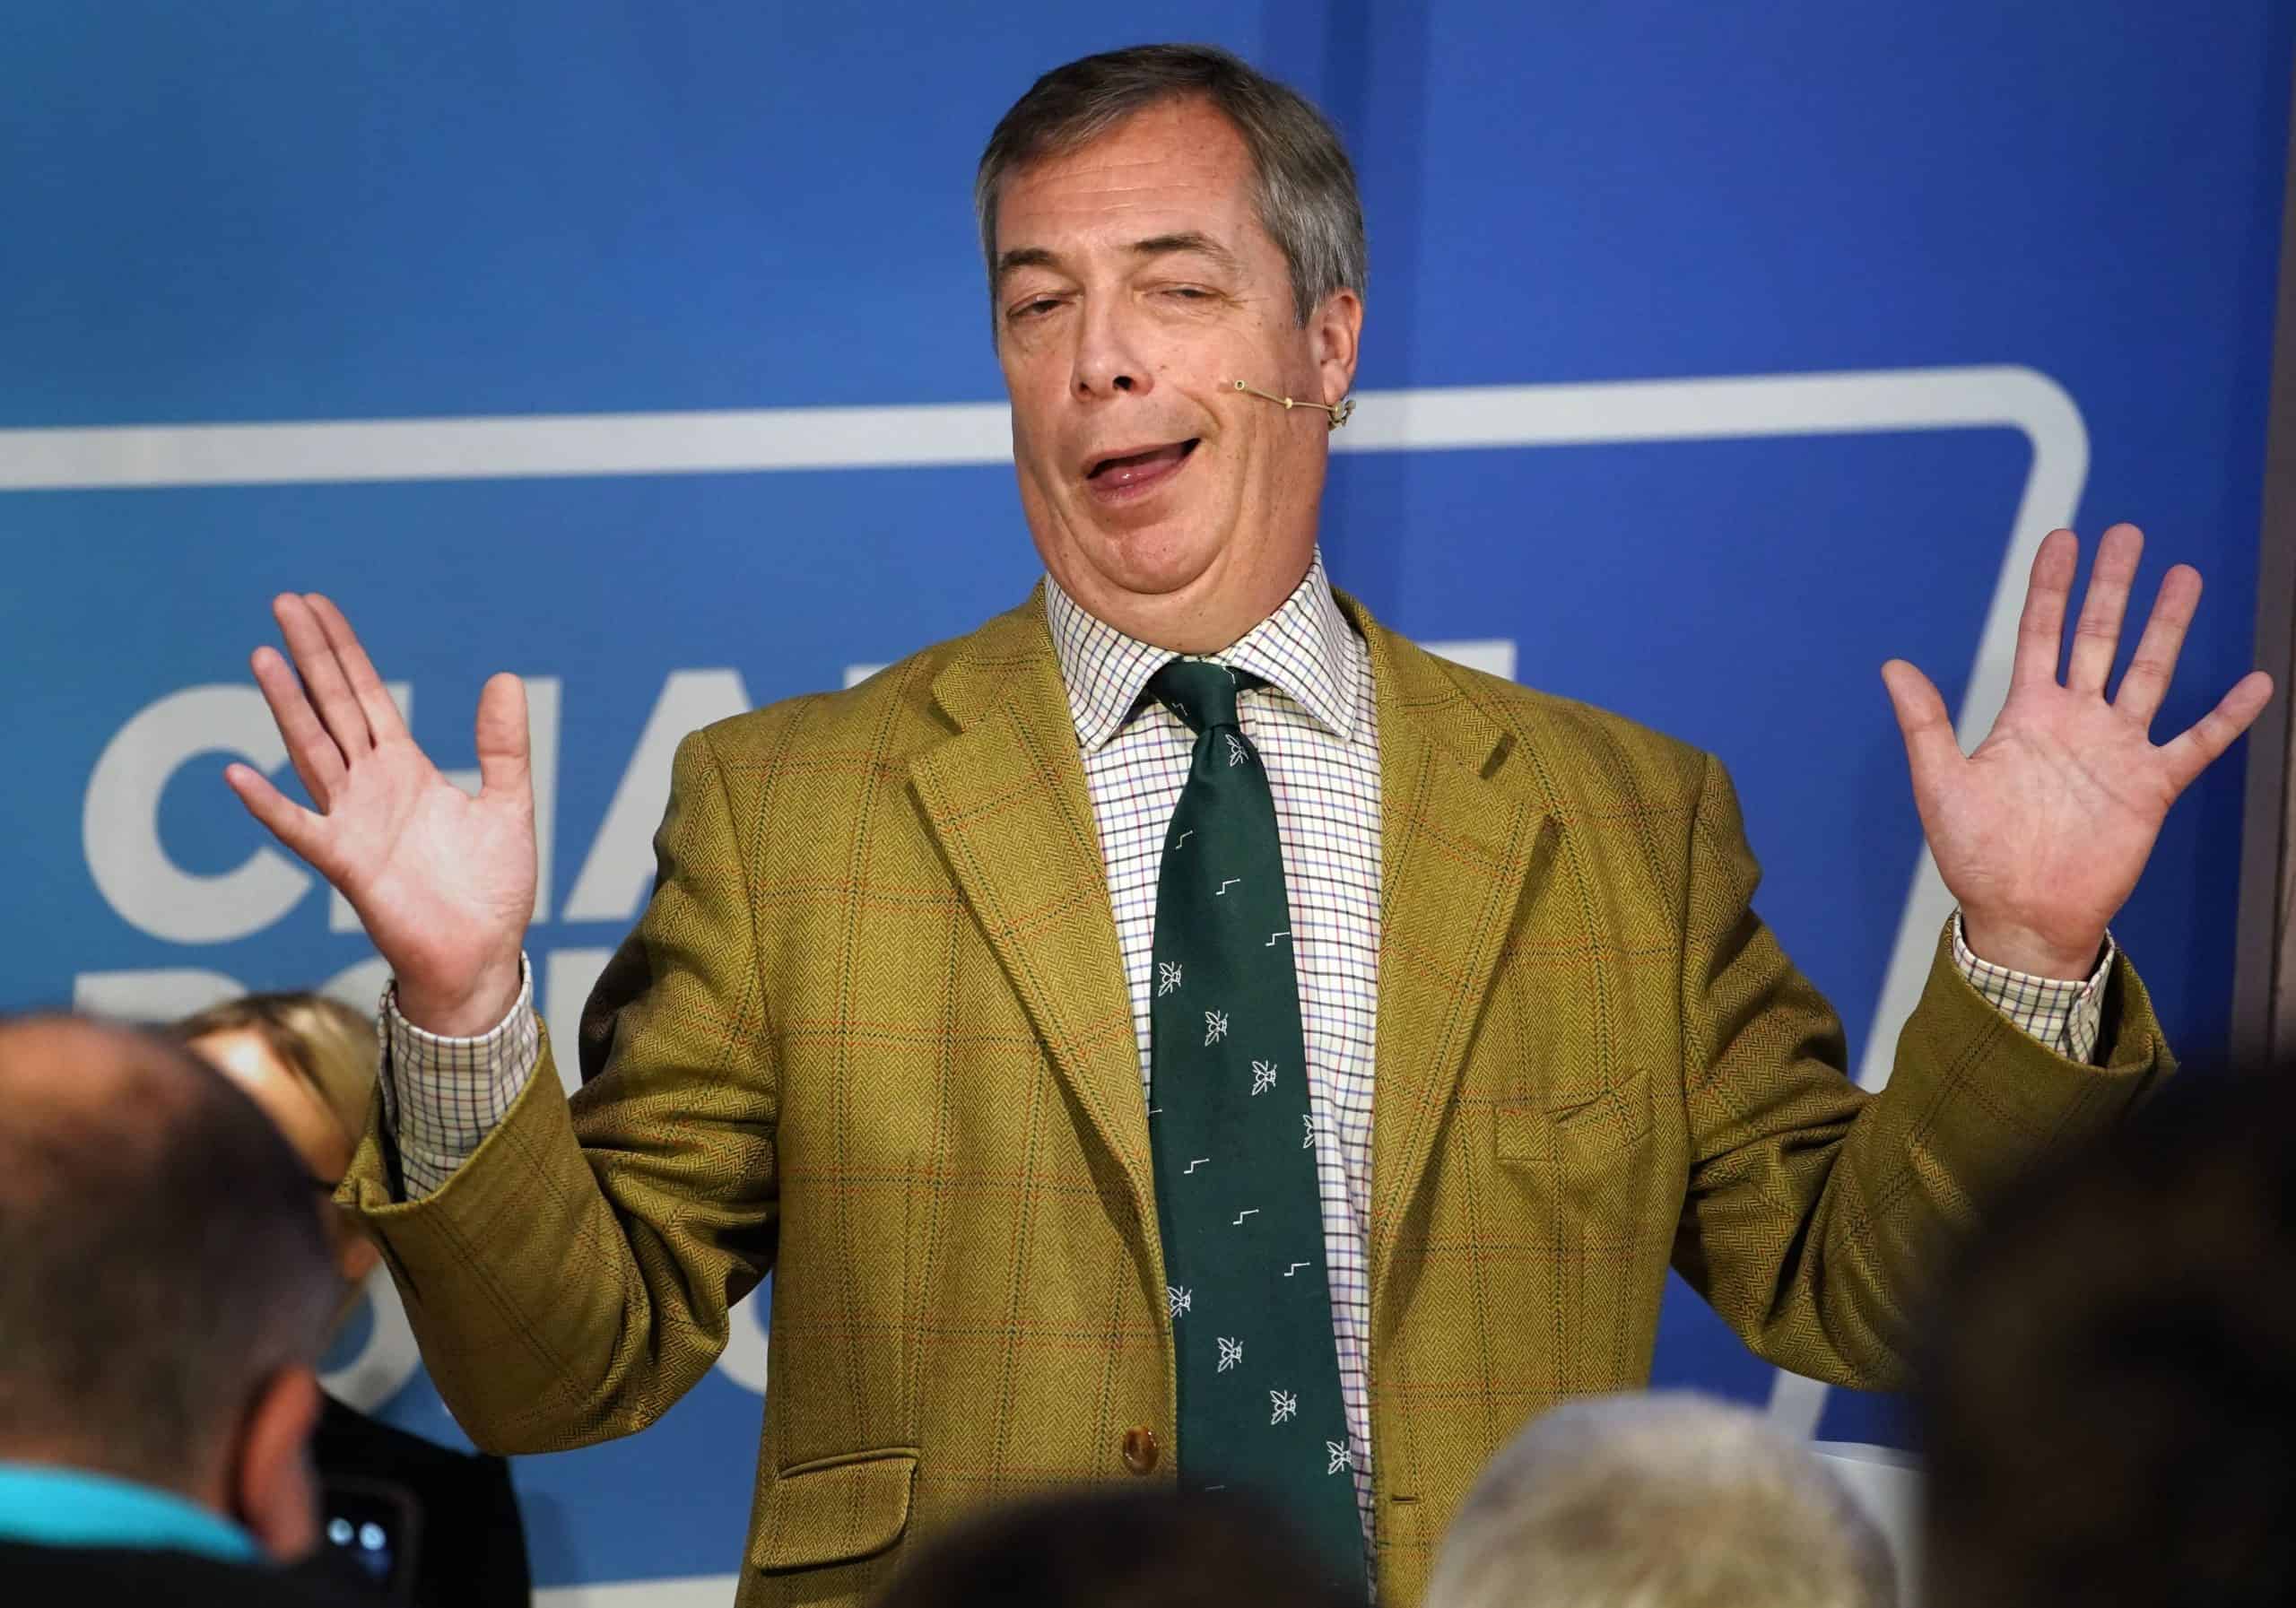 Nigel Farage claims he is quitting politics ‘to fight Britain’s culture wars’